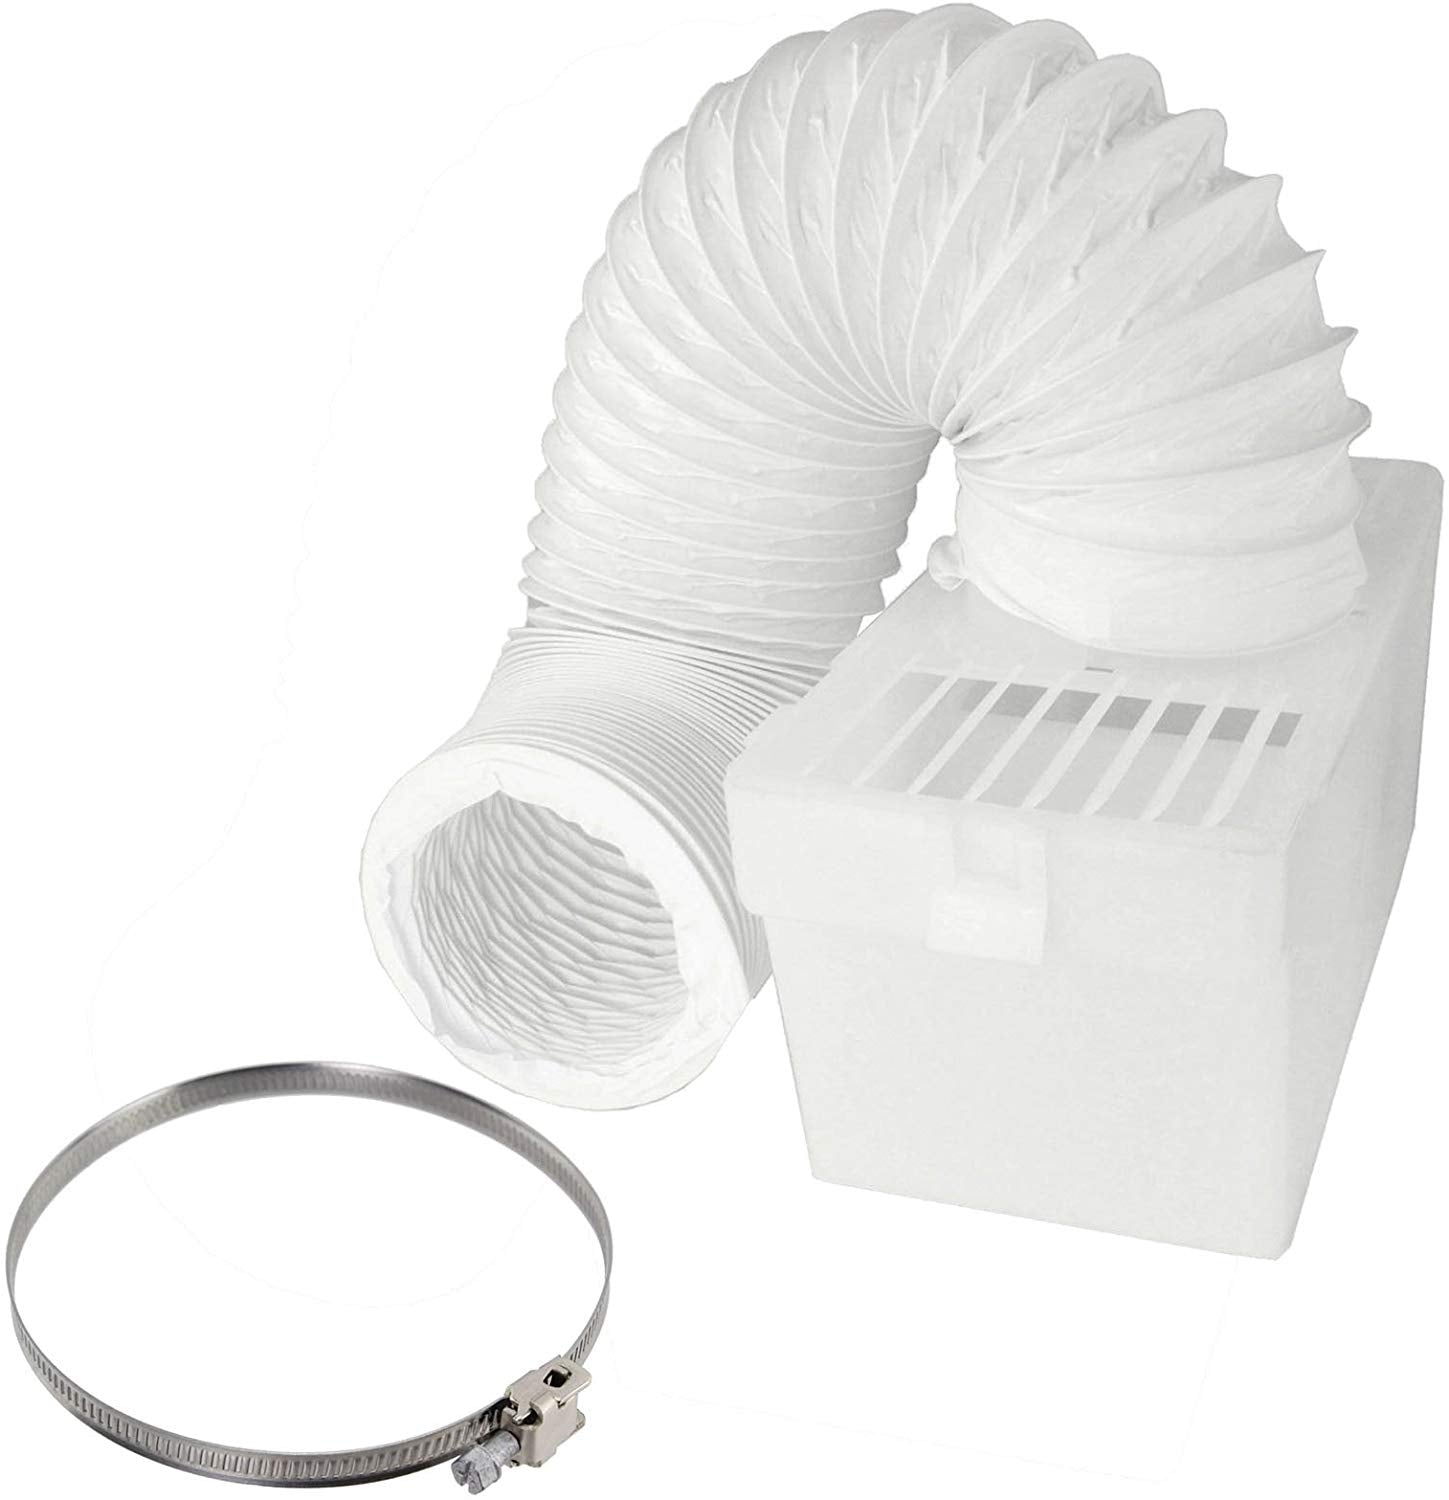 Condenser Vent Box & Hose Kit With Screw Clip for Hotpoint Vented Tumble Dryer (4" / 100mm Diameter)